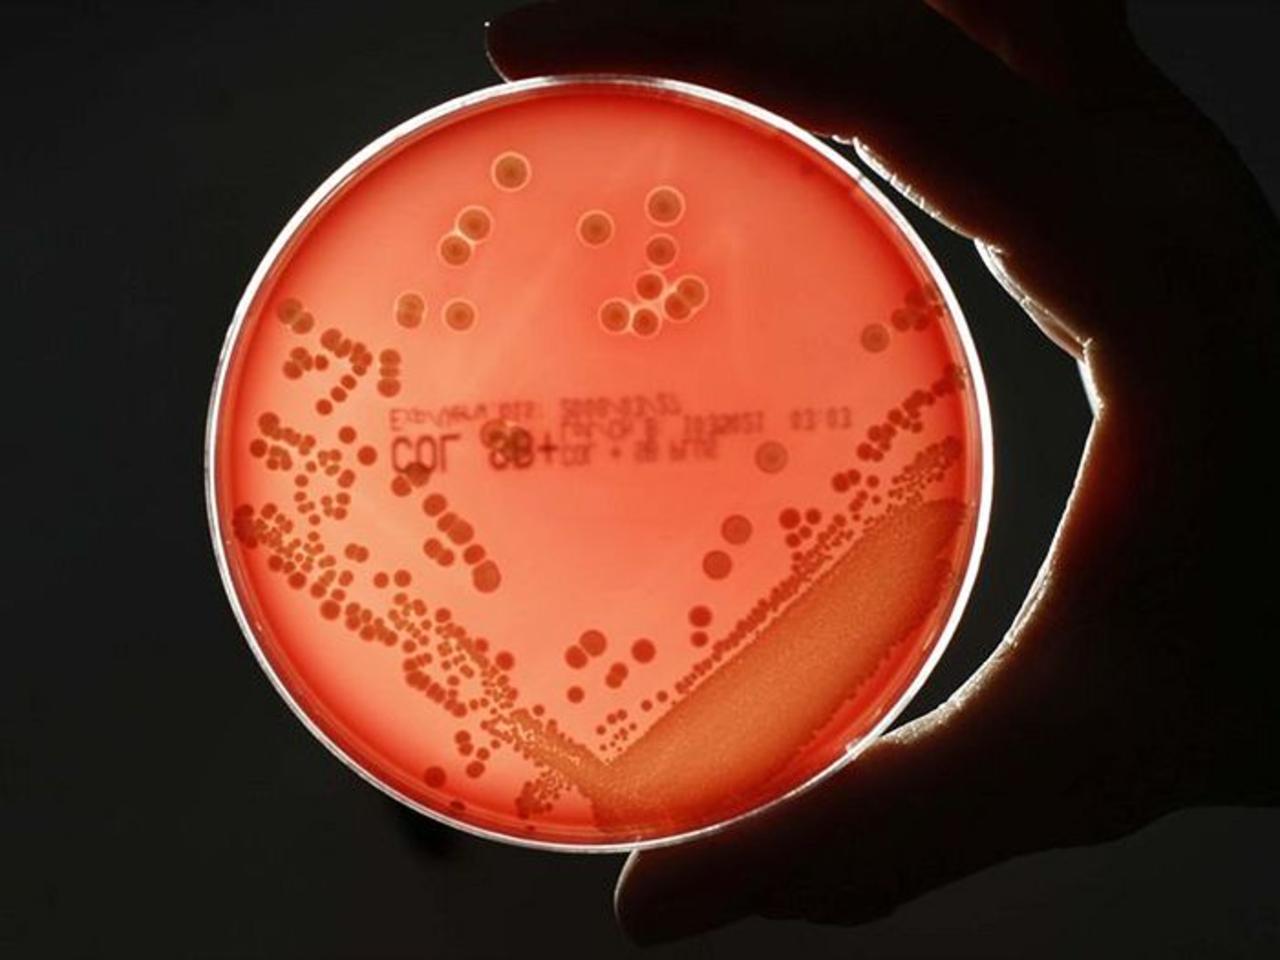 The rise and rise of the Superbug